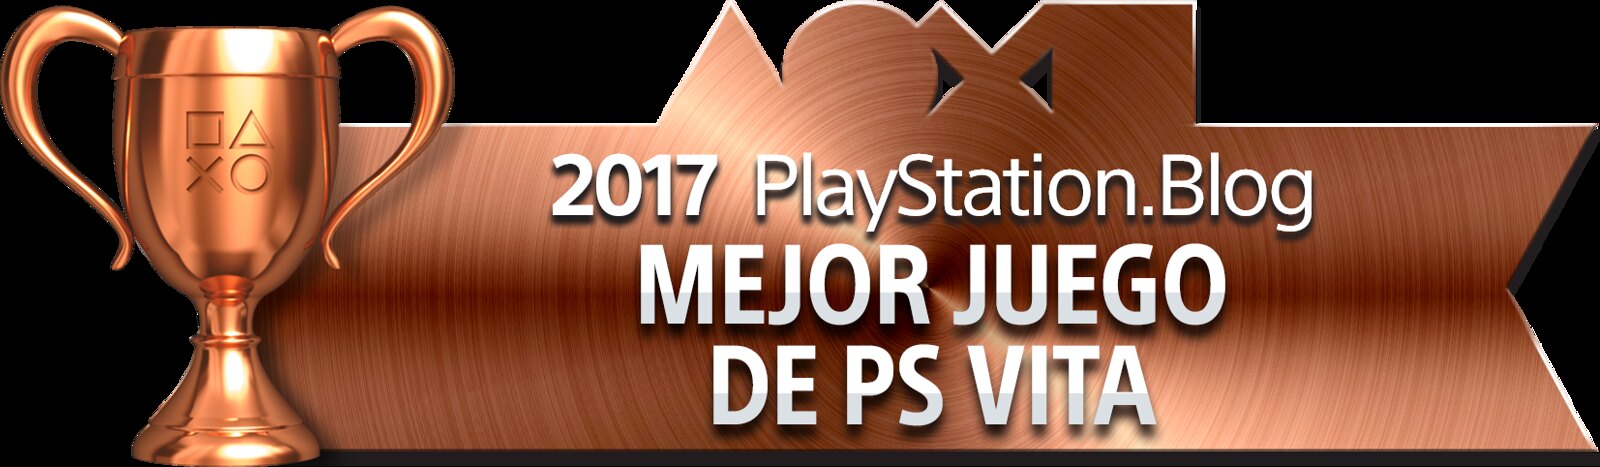 PlayStation Blog Game of the Year 2017 - Best PS Vita Game (Bronze)